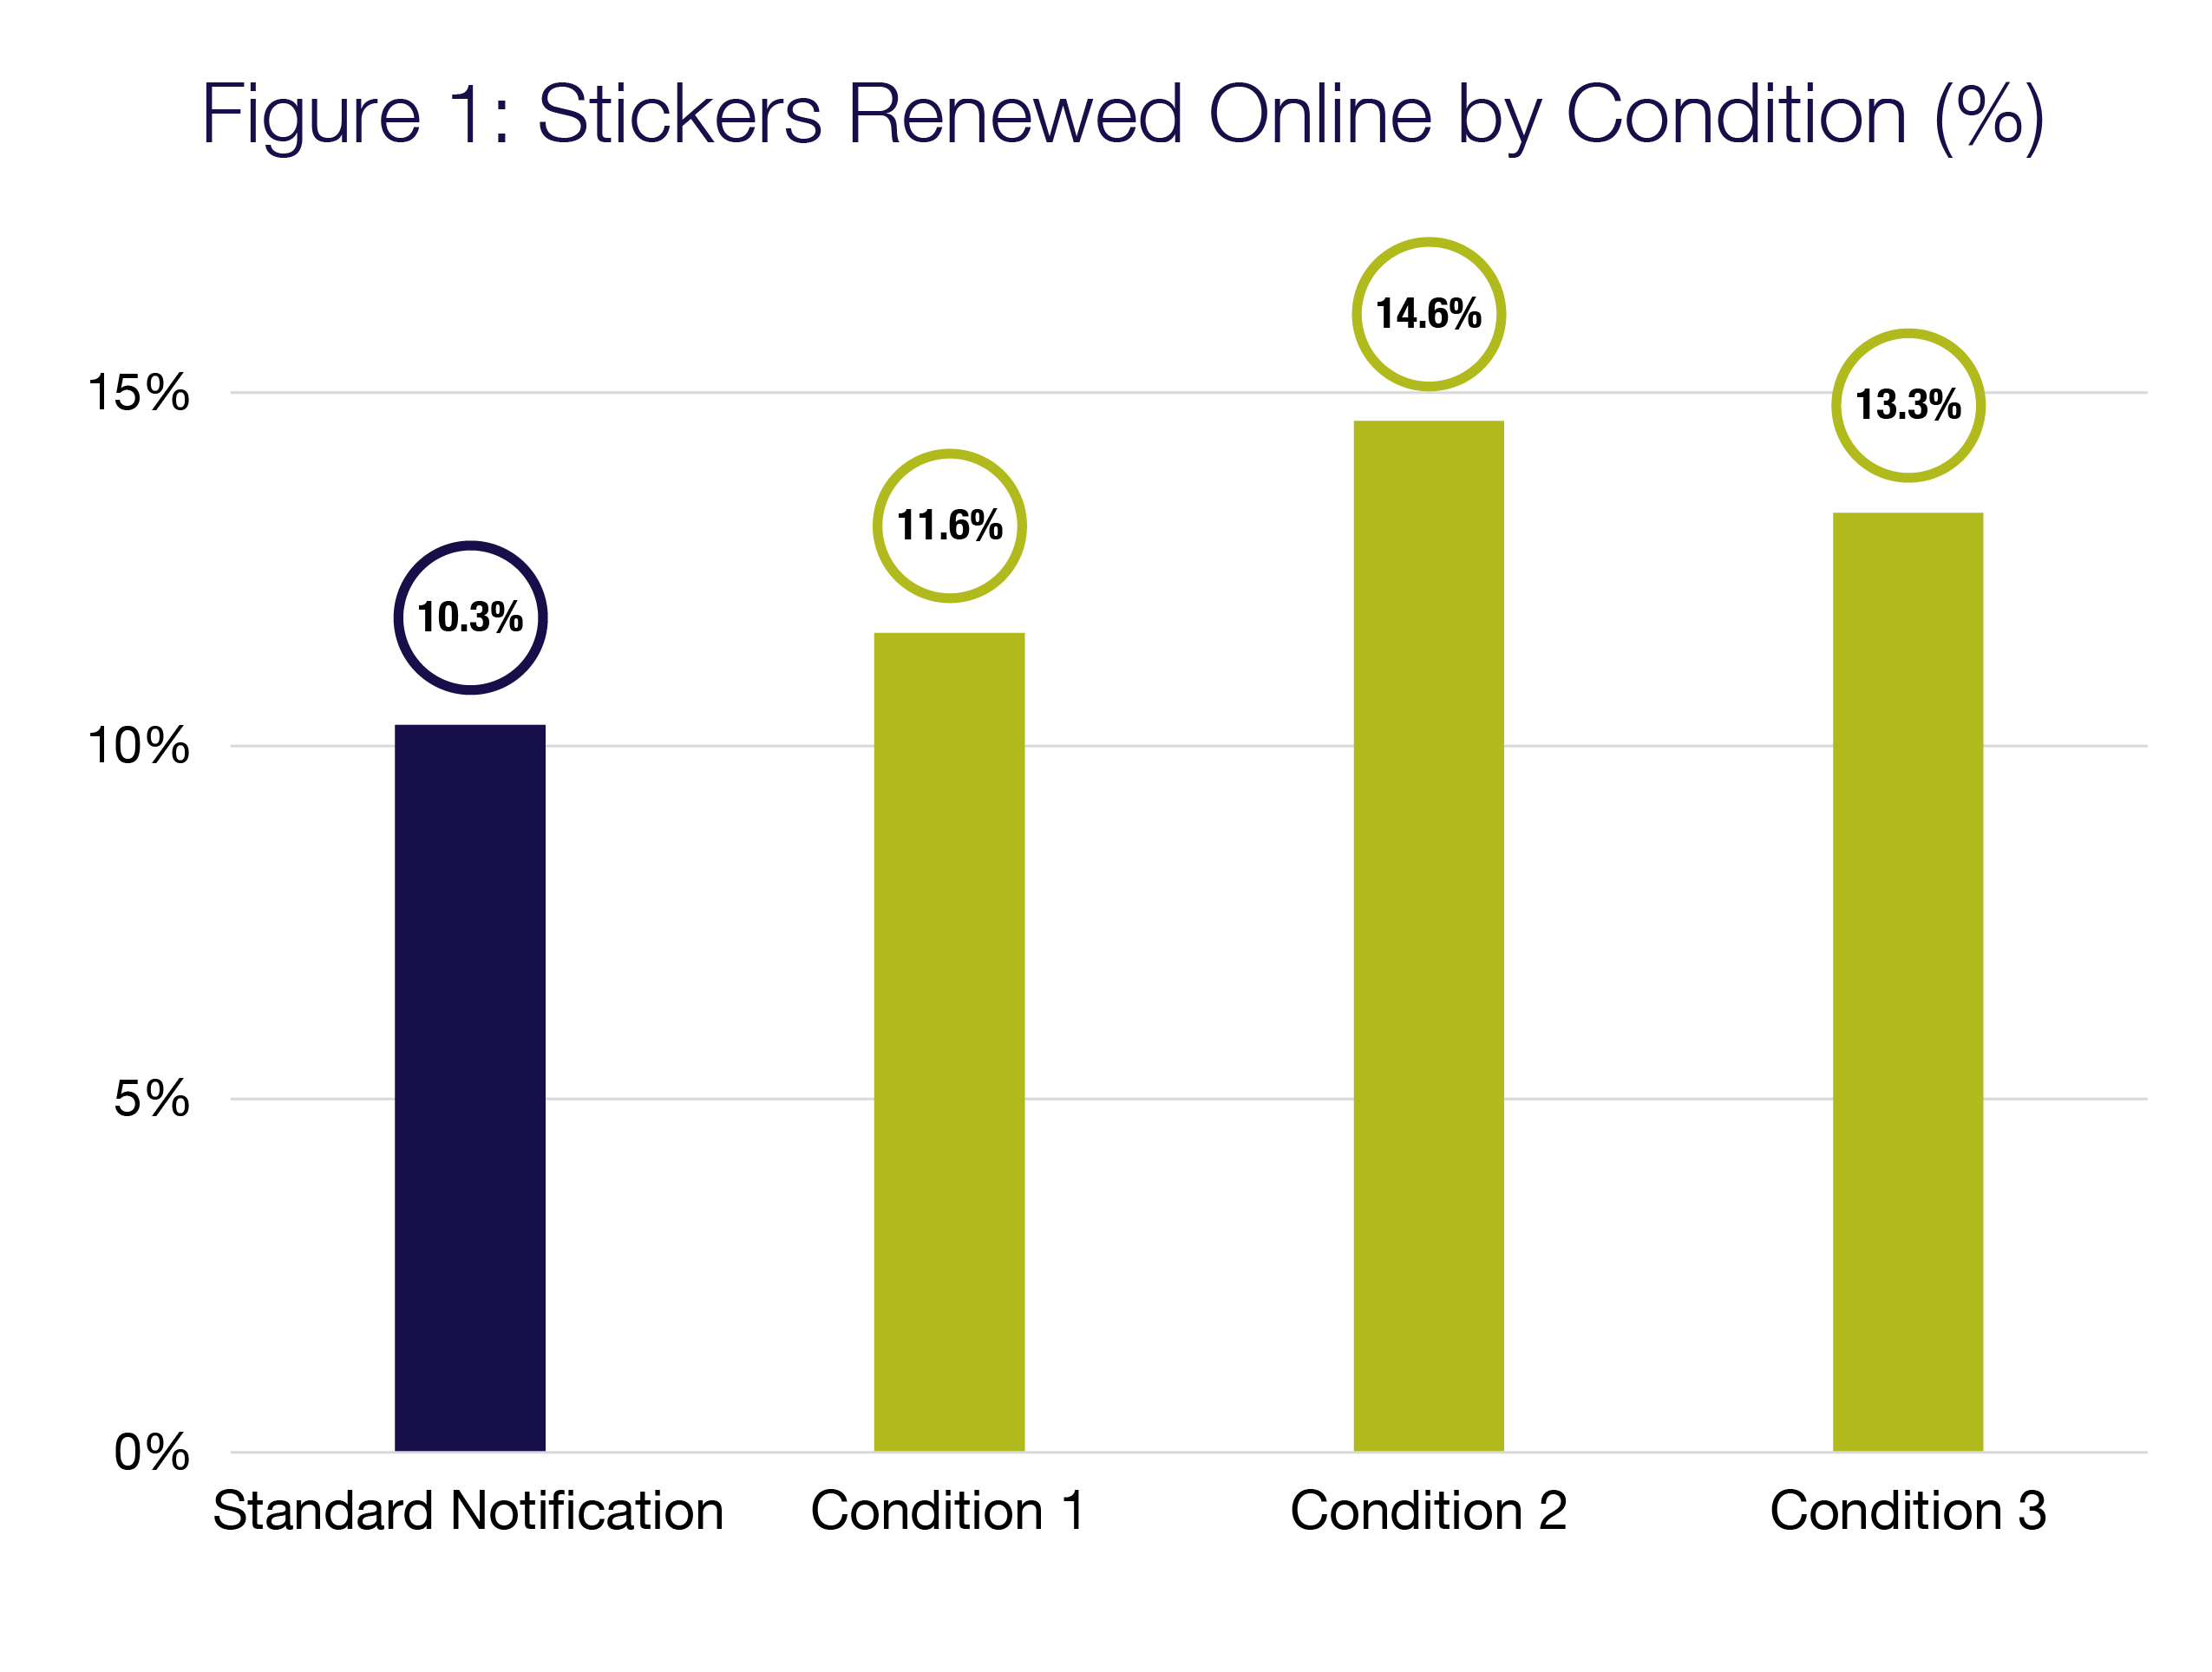 Bar graph depicting the percent of licence plate stickers renewed online by condition. Standard notification = 10.3%. Condition 1 = 11.6%. Condition 2 = 14.6%. Condition 3 = 13.3%.